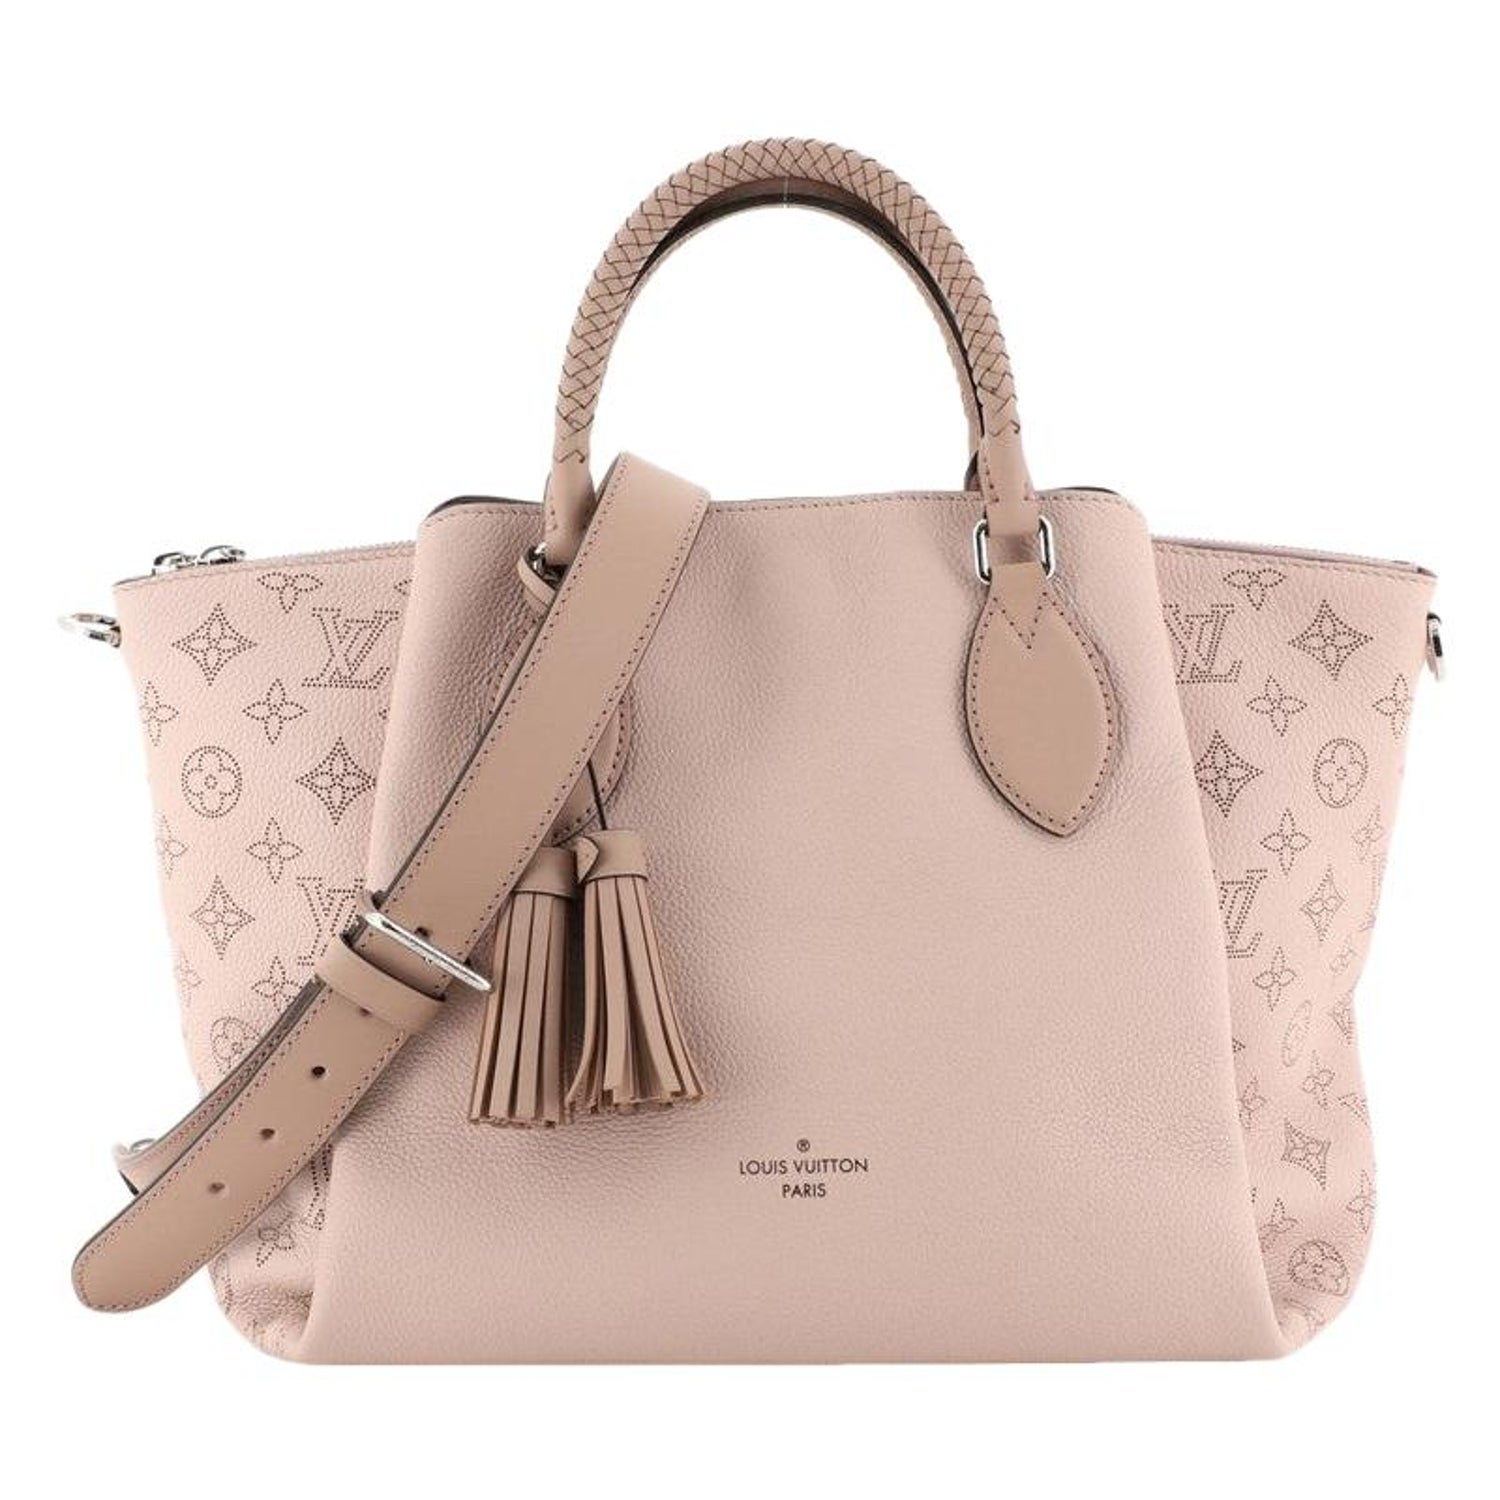 Styles and MORE - Louis Vuitton Haumea Mahina First Copy